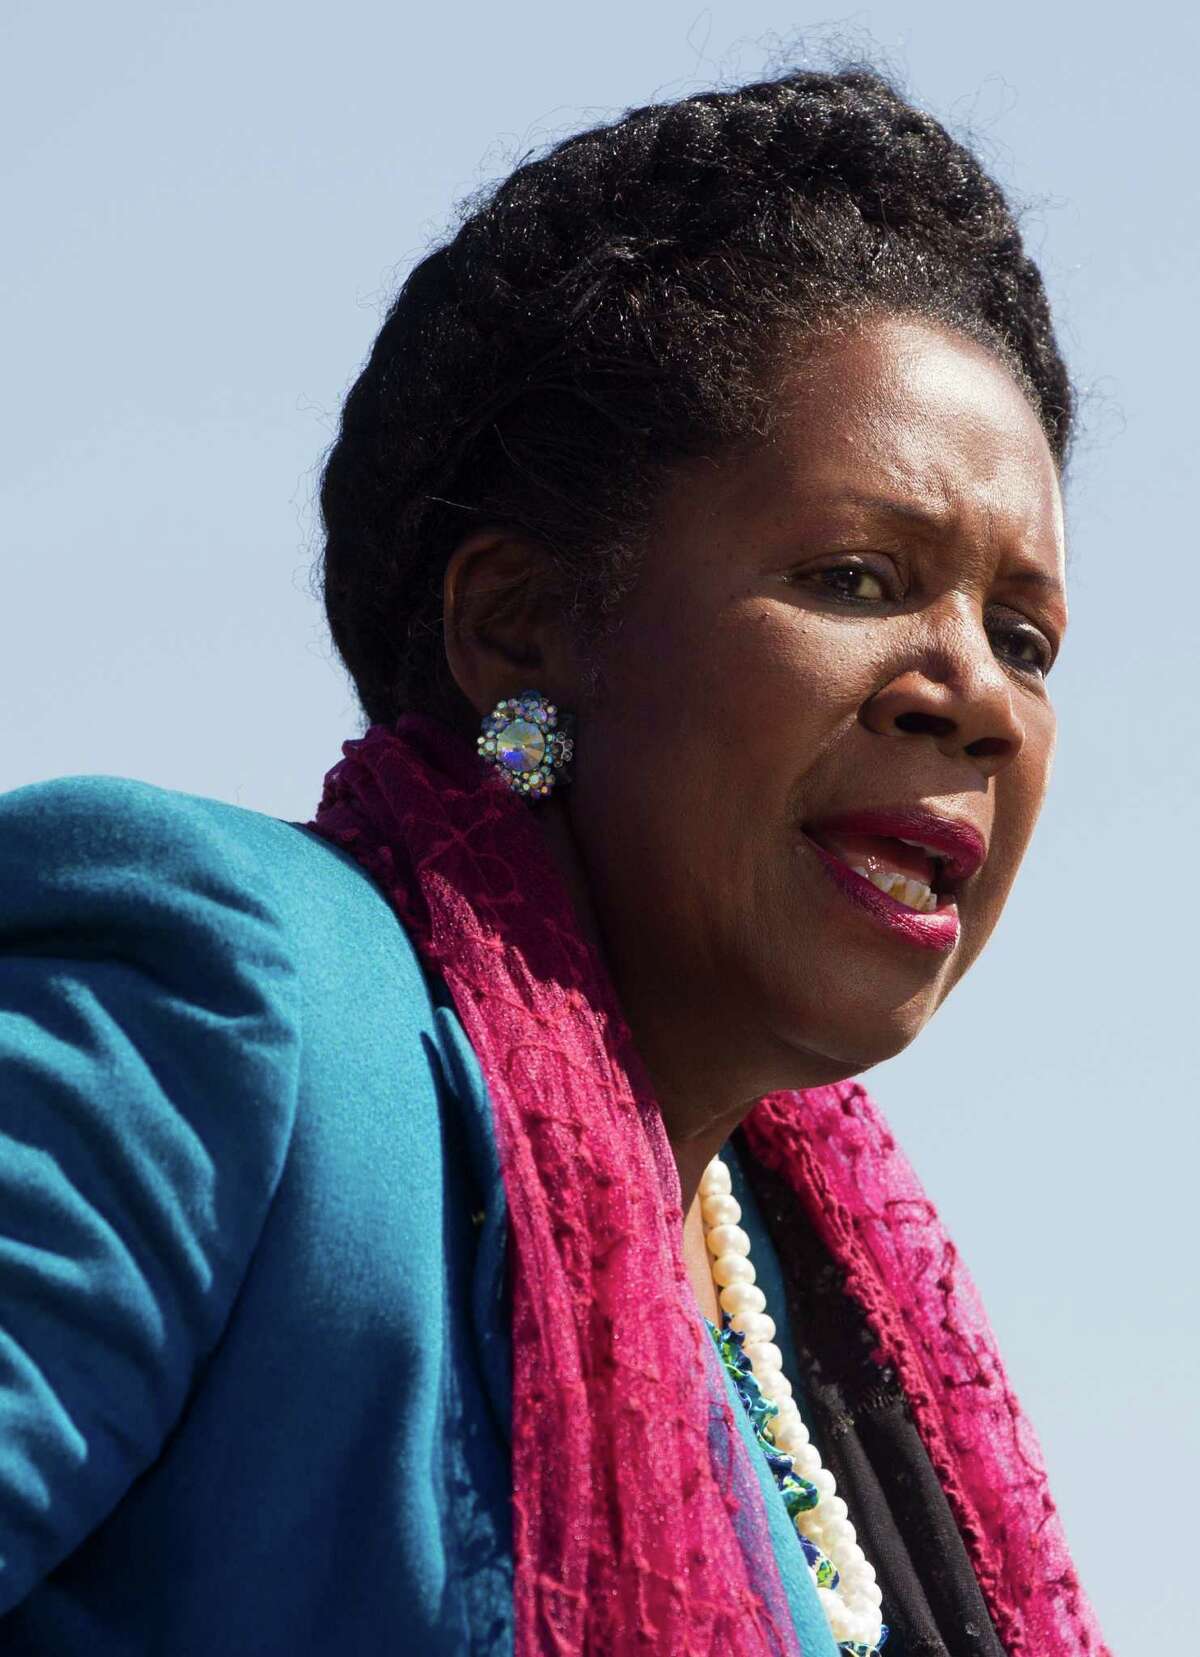 Houston Democrat Sheila Jackson Lee and Humble Republican Ted Poe, have not disclosed any gifts they received and detailed what they did with them.